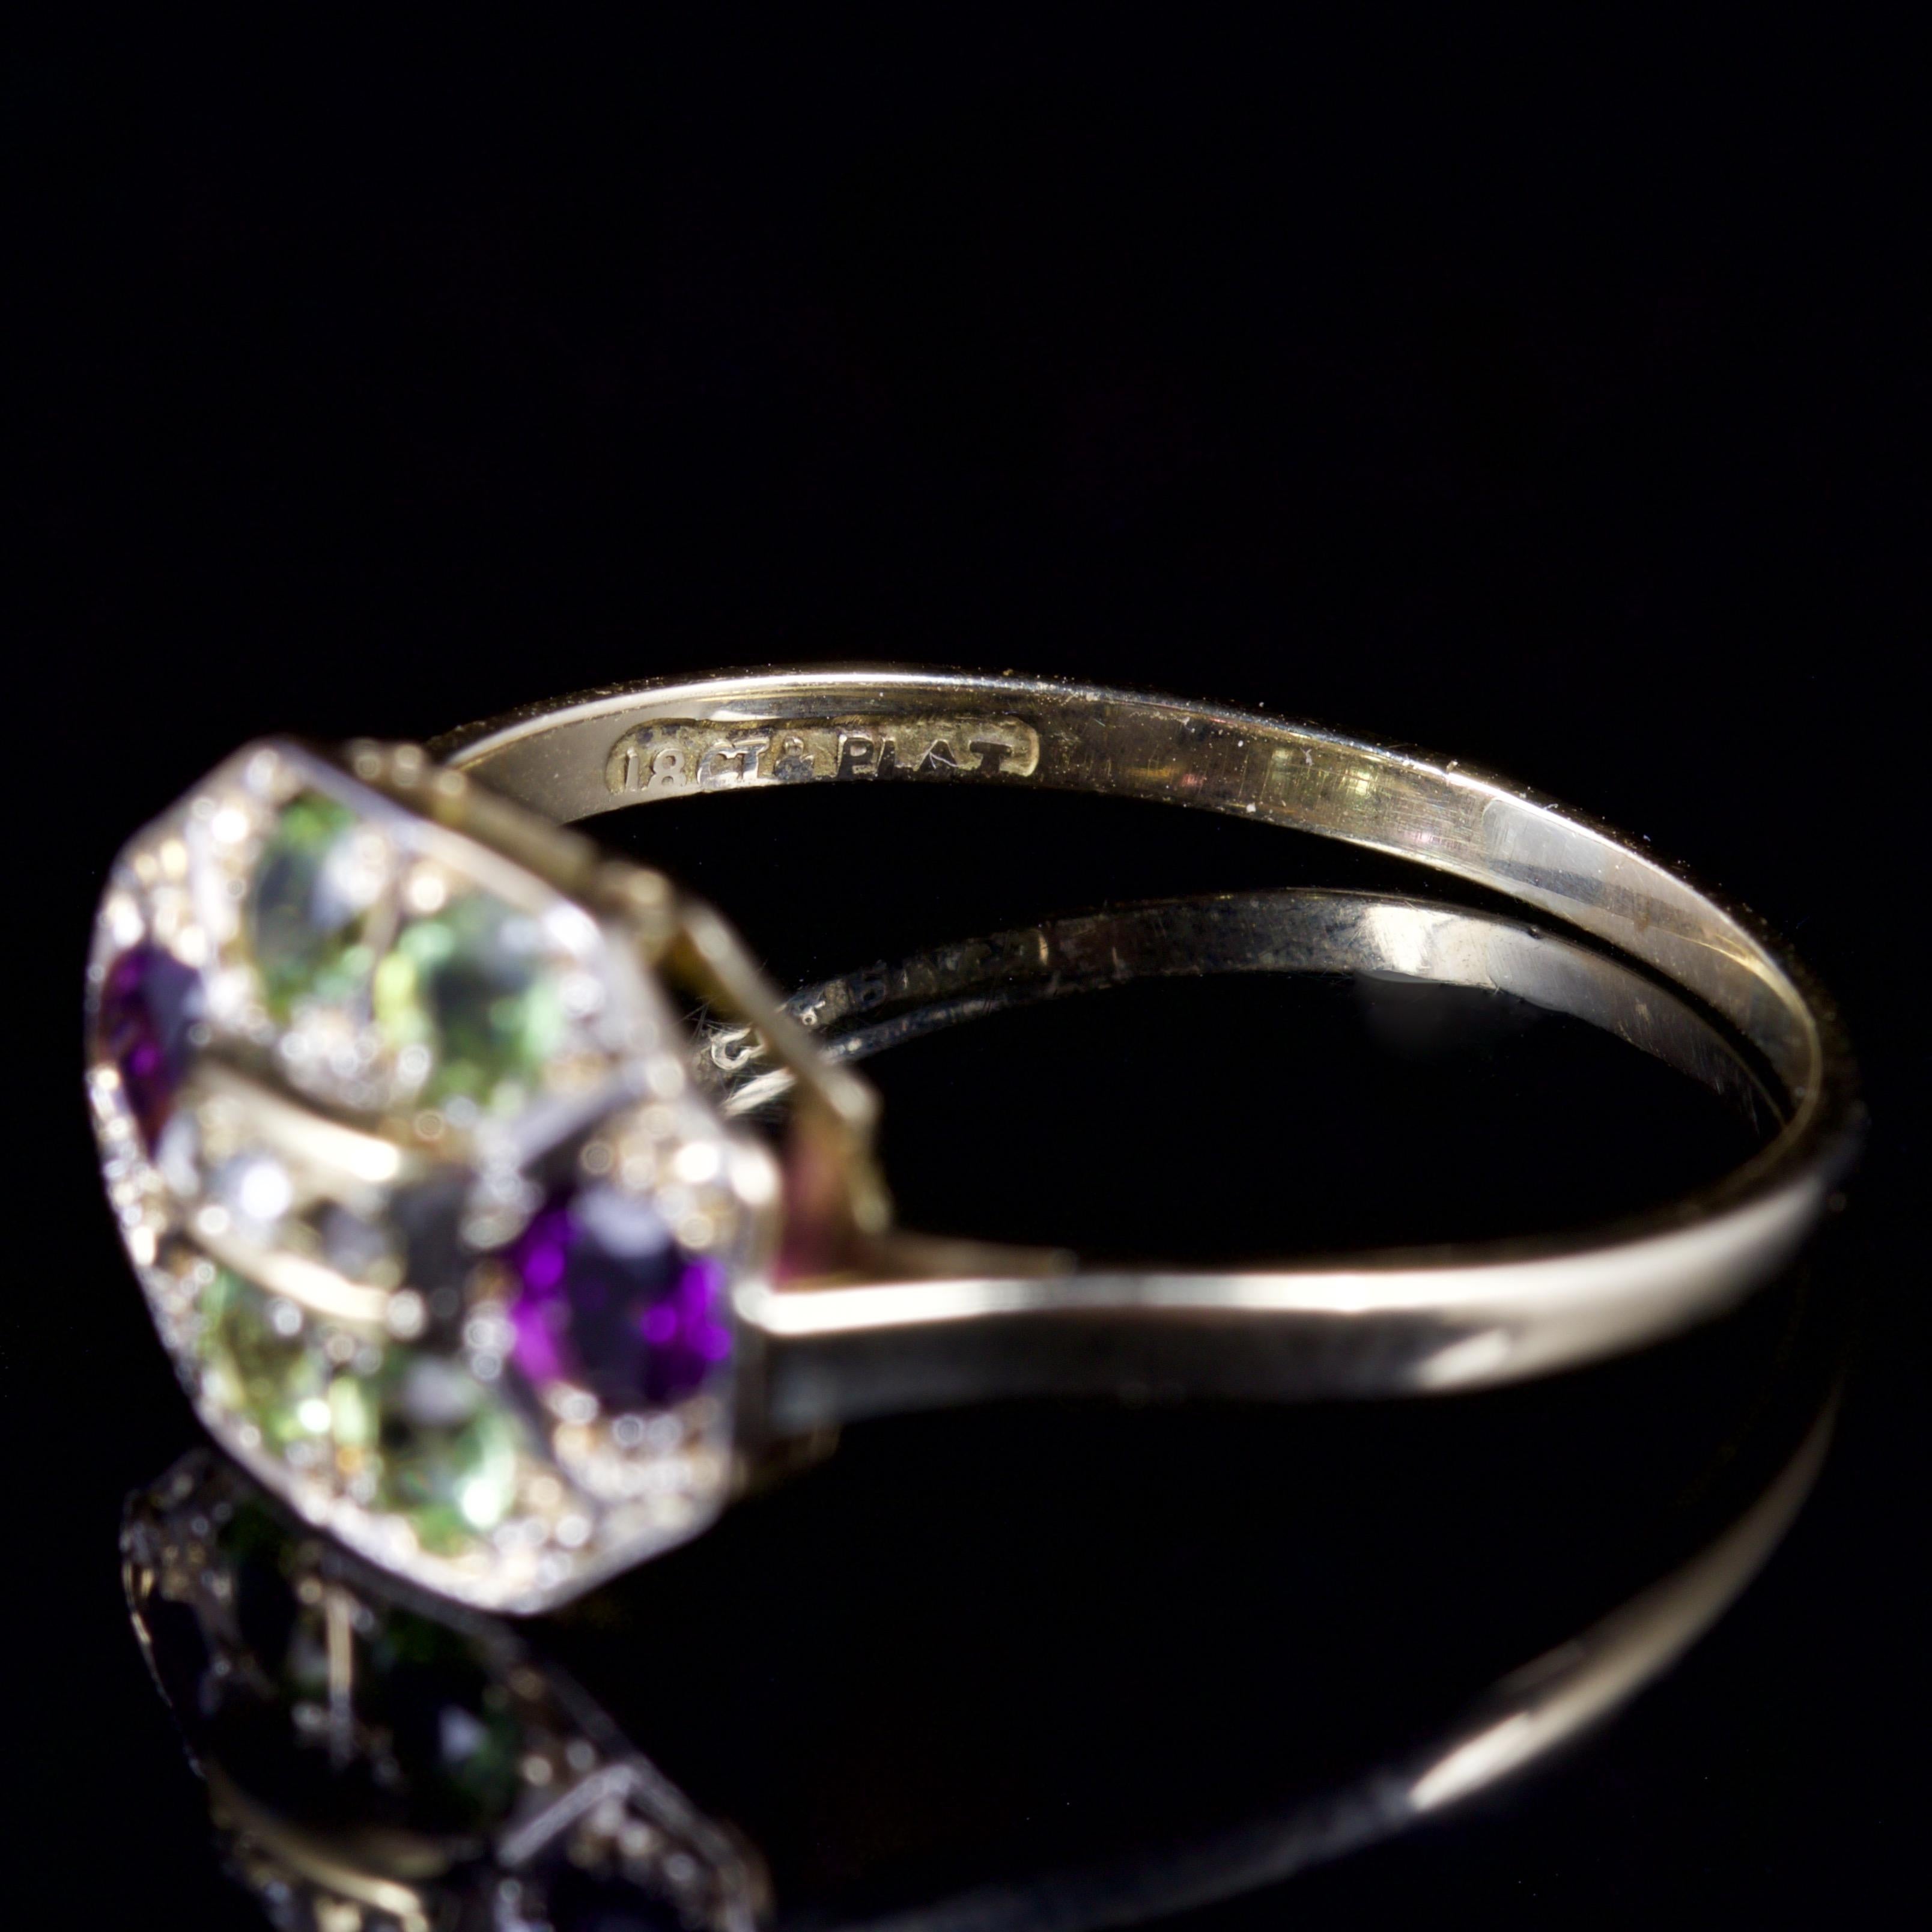 Antique Victorian Suffragette Ring Diamond Amethyst Peridot 18 Carat Gold In Excellent Condition For Sale In Lancaster, Lancashire